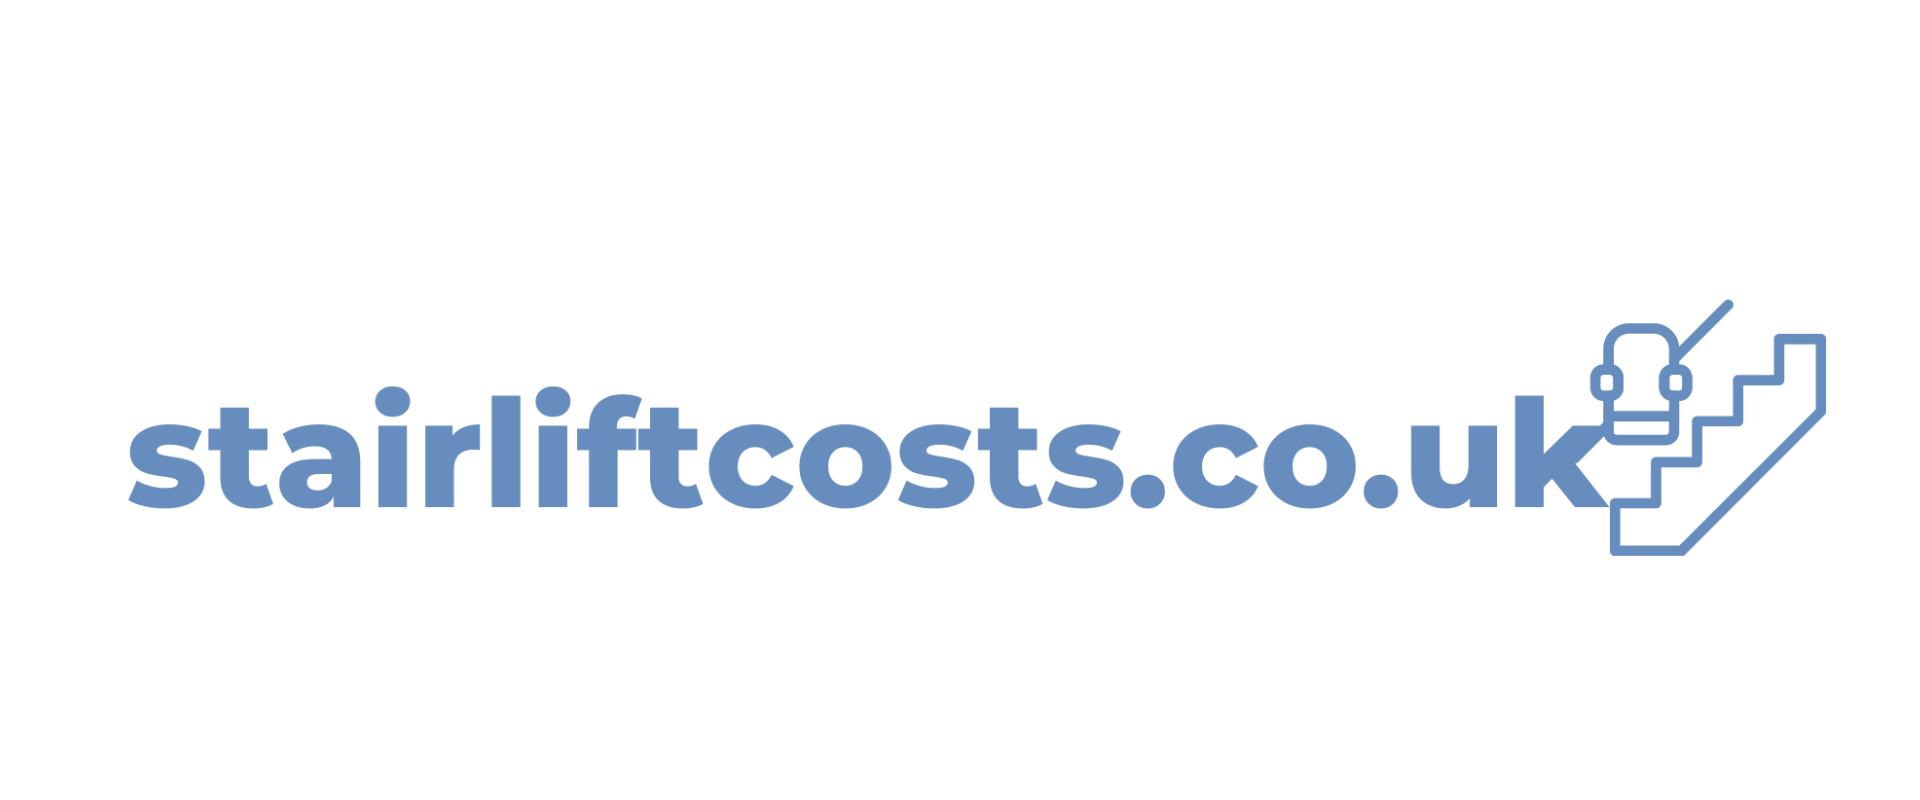 stairlift costs